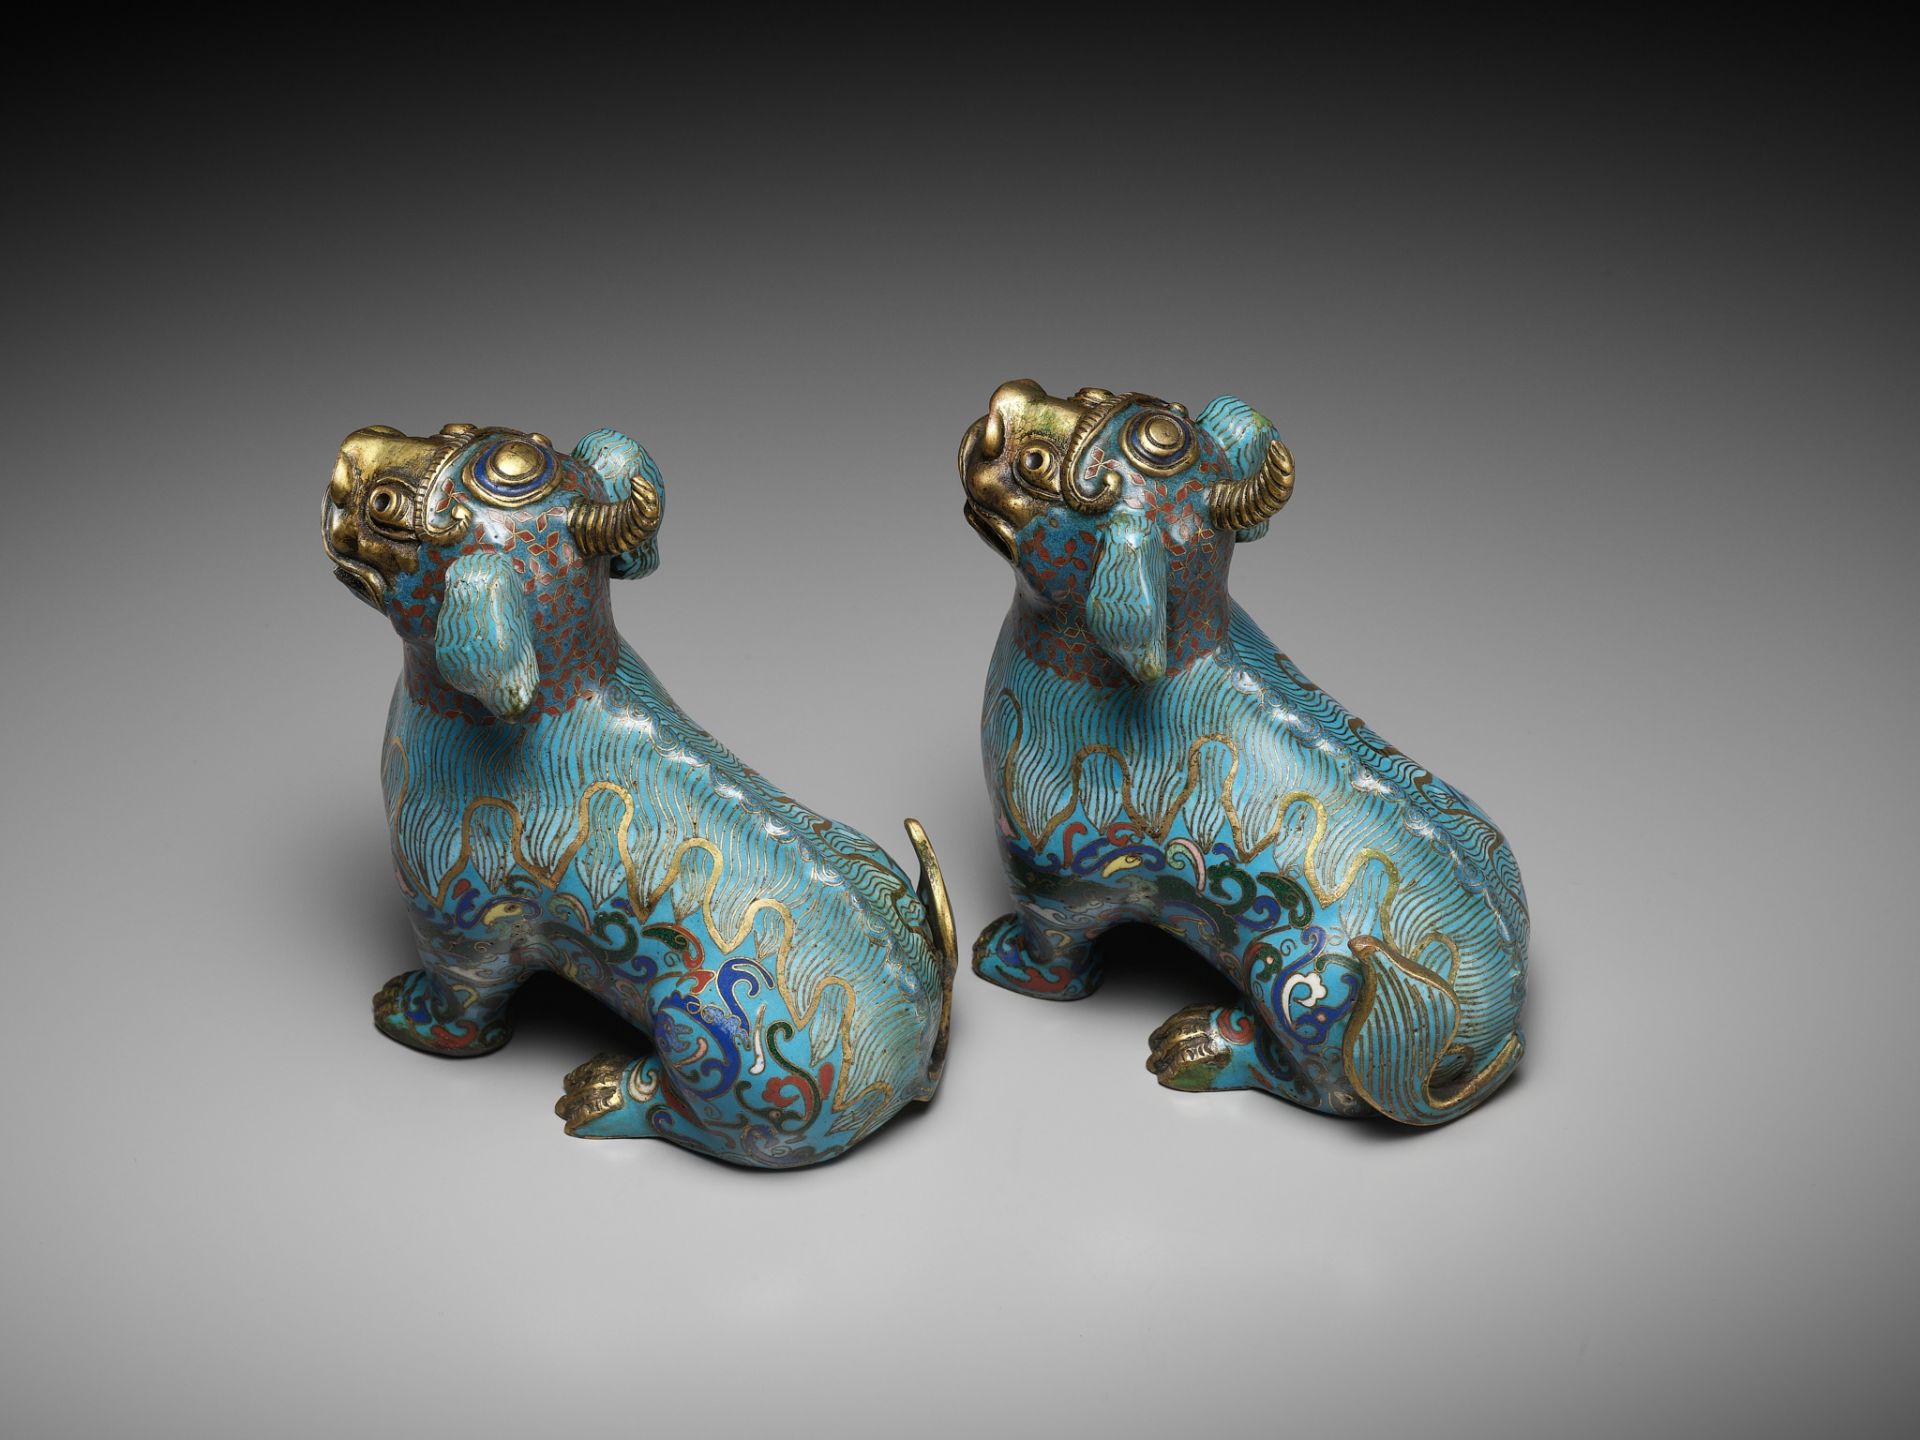 A PAIR OF GILT-BRONZE AND CLOISONNE ENAMEL LUDUAN, CHINA, 18TH - 19TH CENTURY - Image 7 of 11